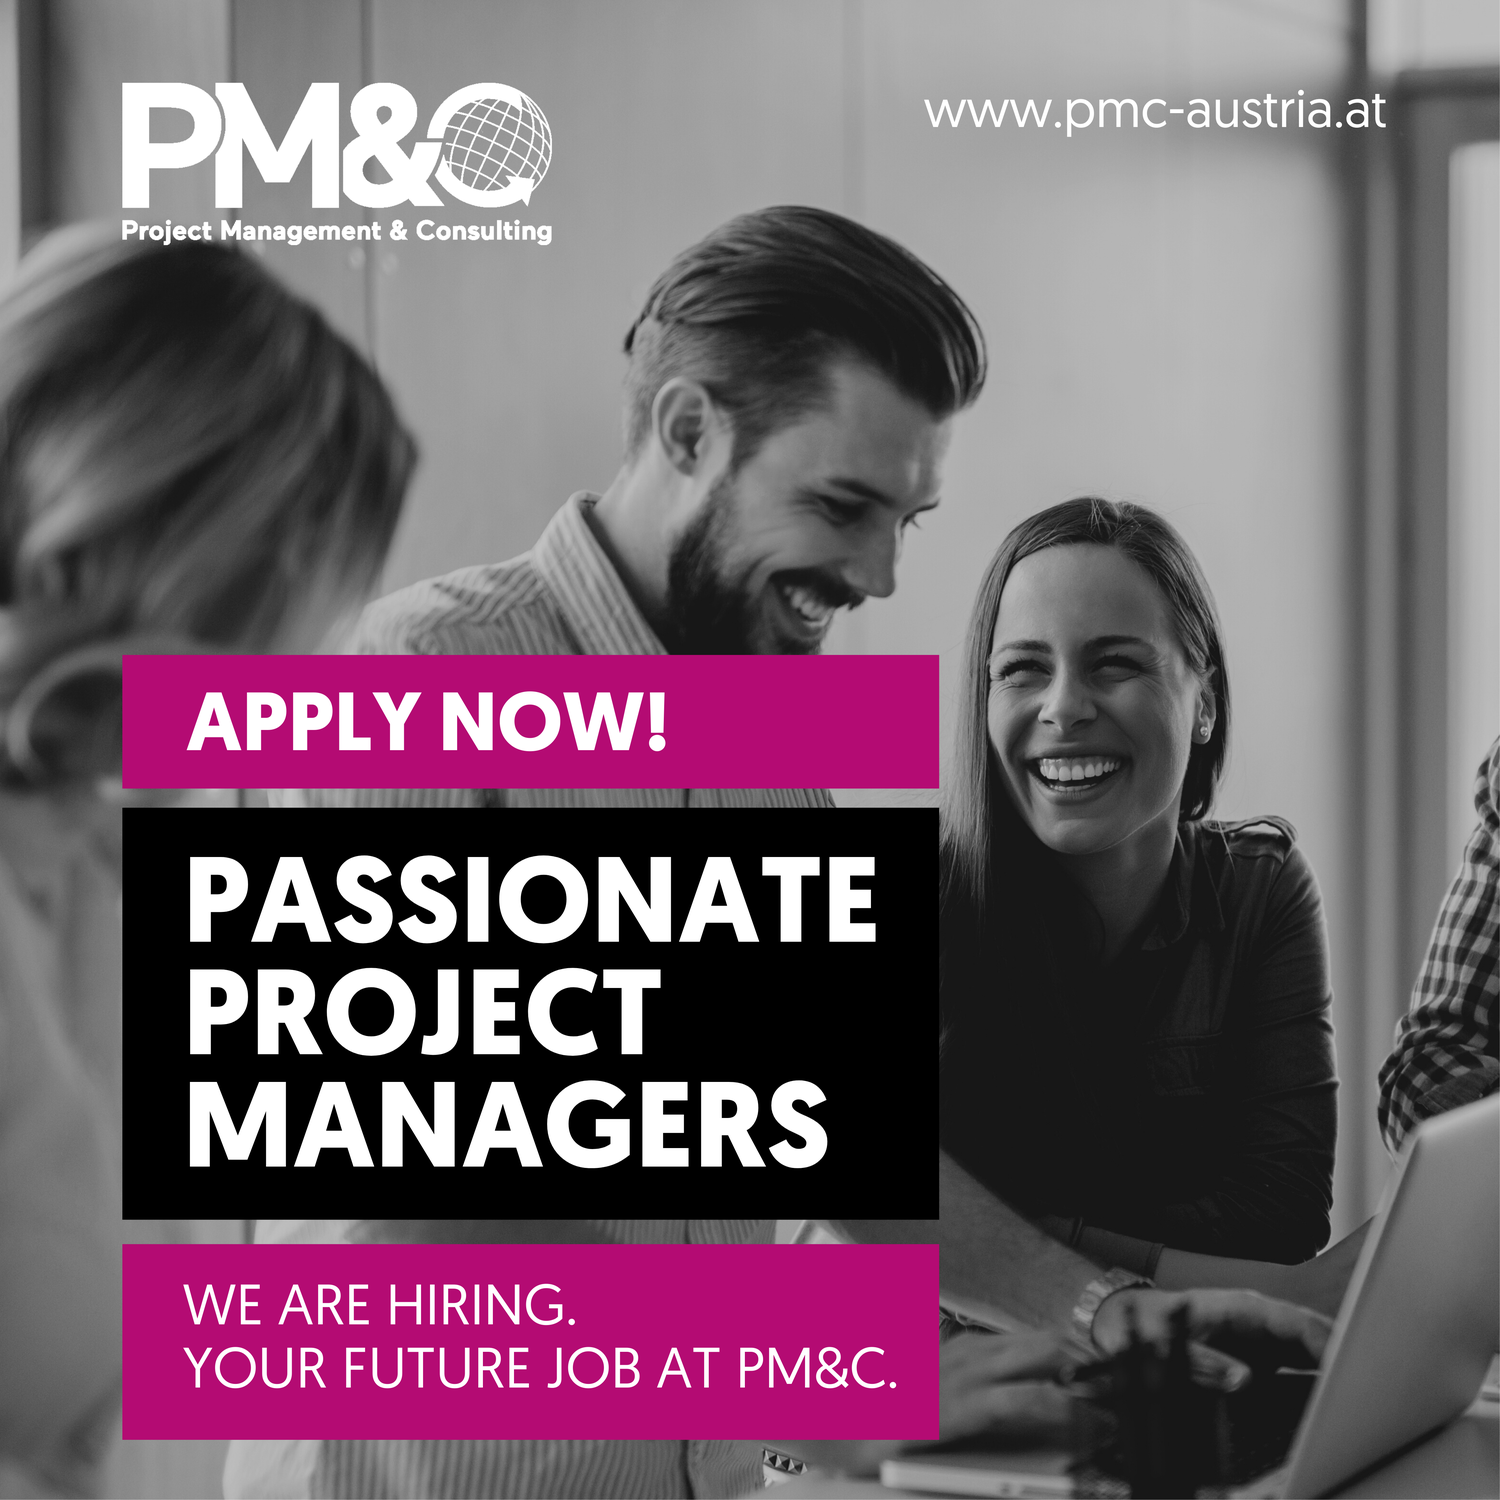 Would you like to support companies in completing and optimizing their projects? Your future job at PM&C